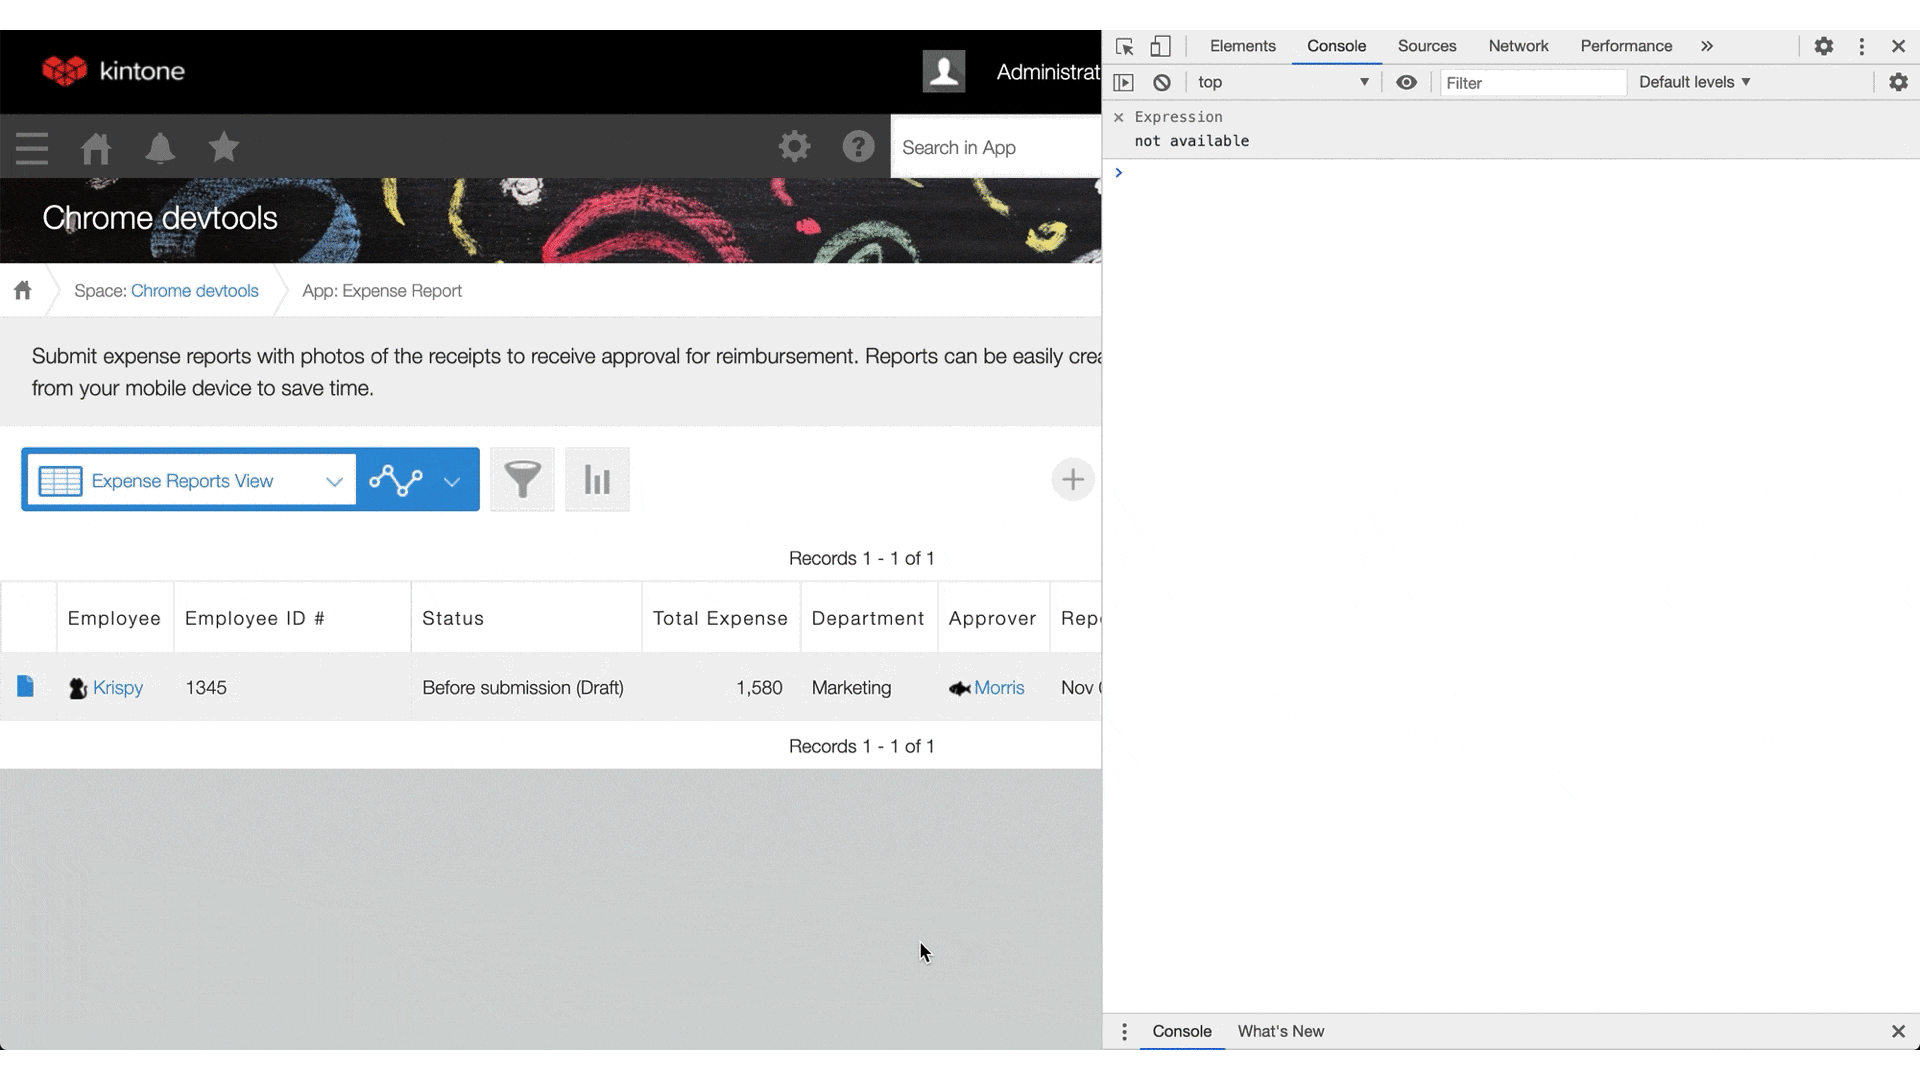 Animated GIF: Open the console in the developer tools and click the gear icon for the Console settings.